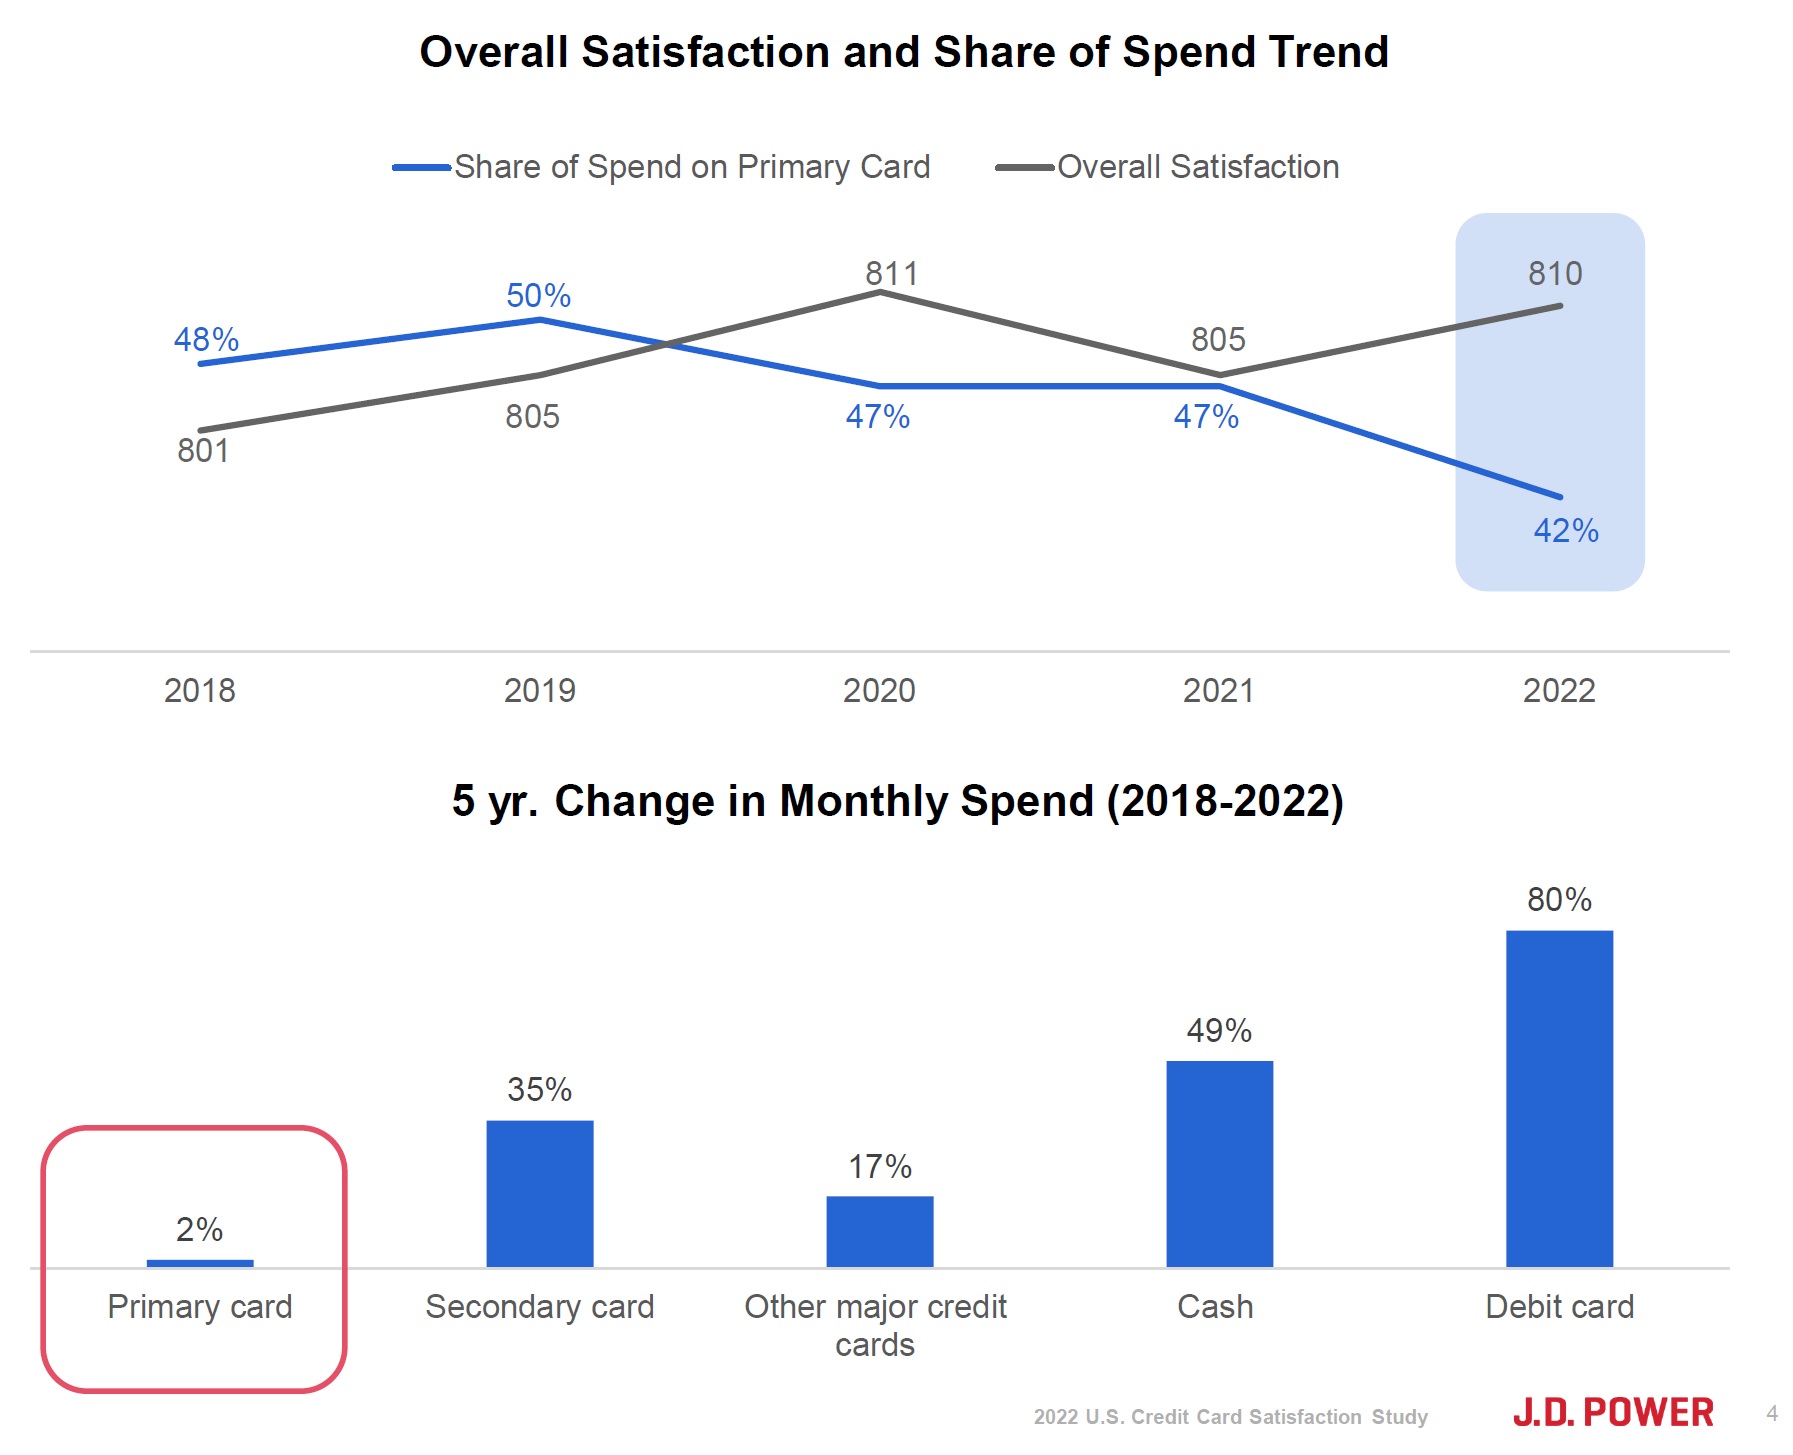 Overall Satisfaction and Share of Spend
2018: Satisfaction is 801, Spend is 48%
2019: Satisfaction is 805, Spend is 50%
2020: Satisfaction is 811, Spend is 47%
2021: Satisfaction is 805, Spend is 47%
2022: Satisfaction is 810, Spend is 42%


5 Year Change in Monthly SPend (2018-2022) 
Primary Card: 2% 
Secondary Card: 35%
Other major credit cards: 17%
Cash: 49%
Debit Cards: 80%